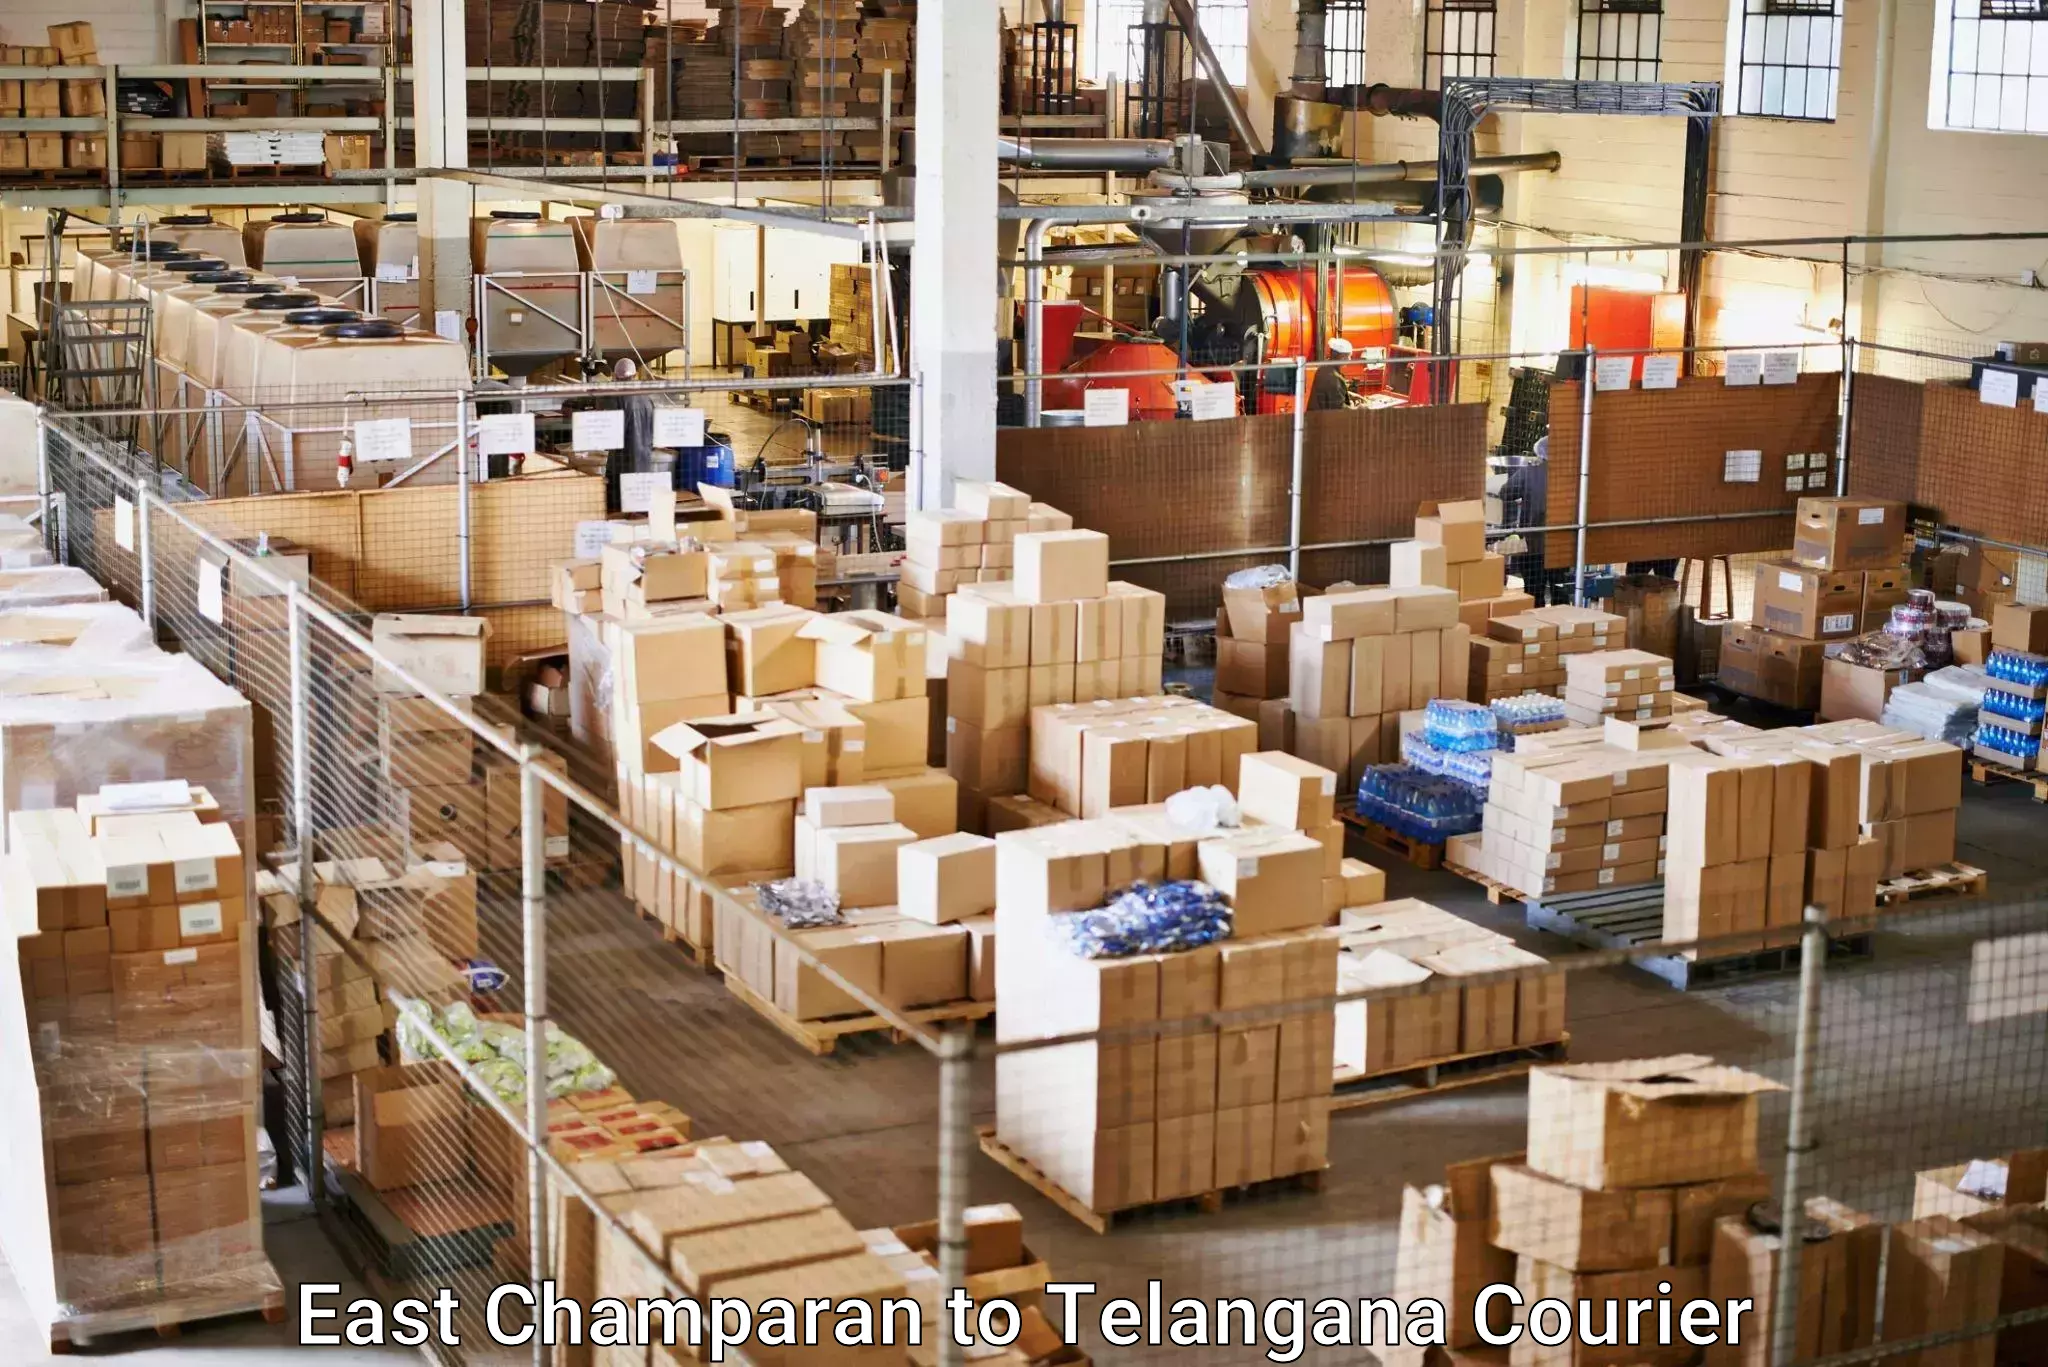 Business shipping needs East Champaran to Yellareddy